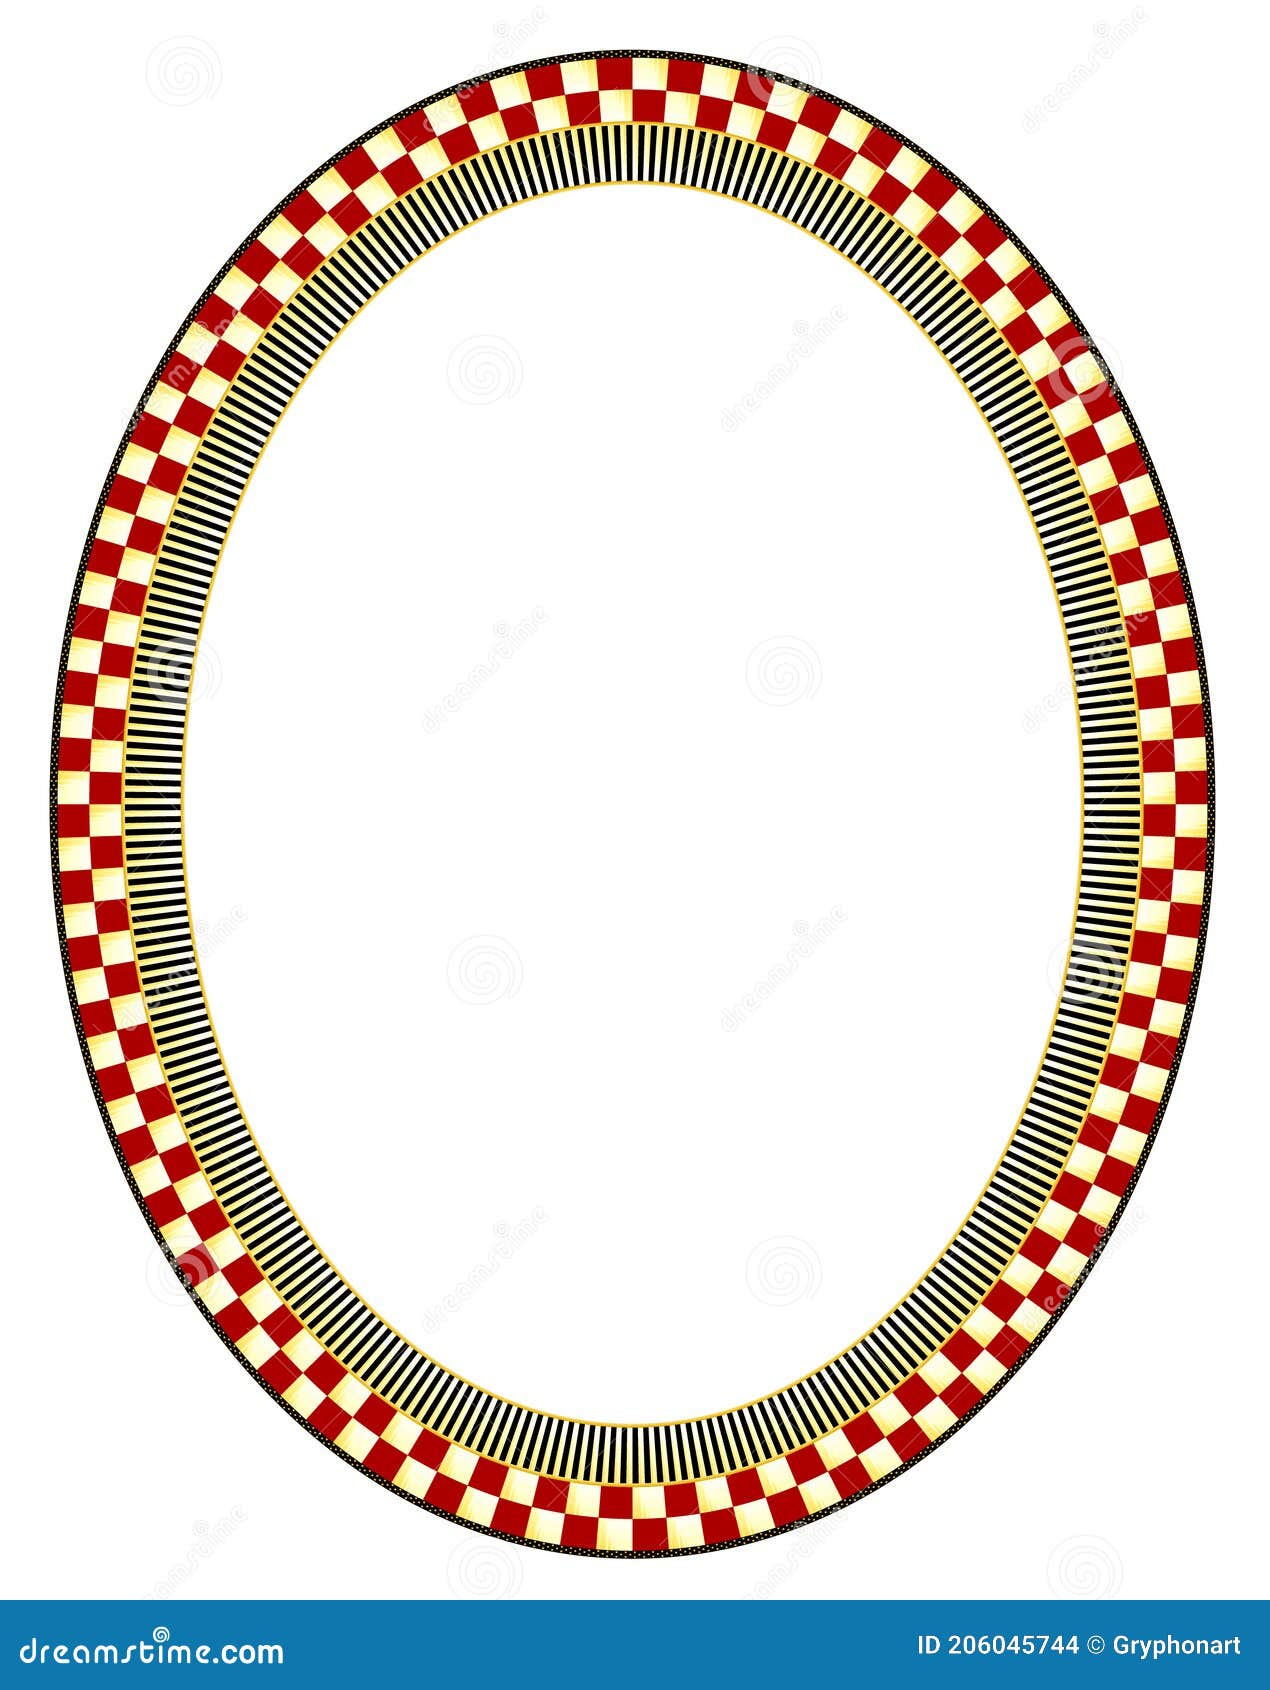 brightly chequered and striped oval or elipse d frame with a black outside edge containing gold polka dots.